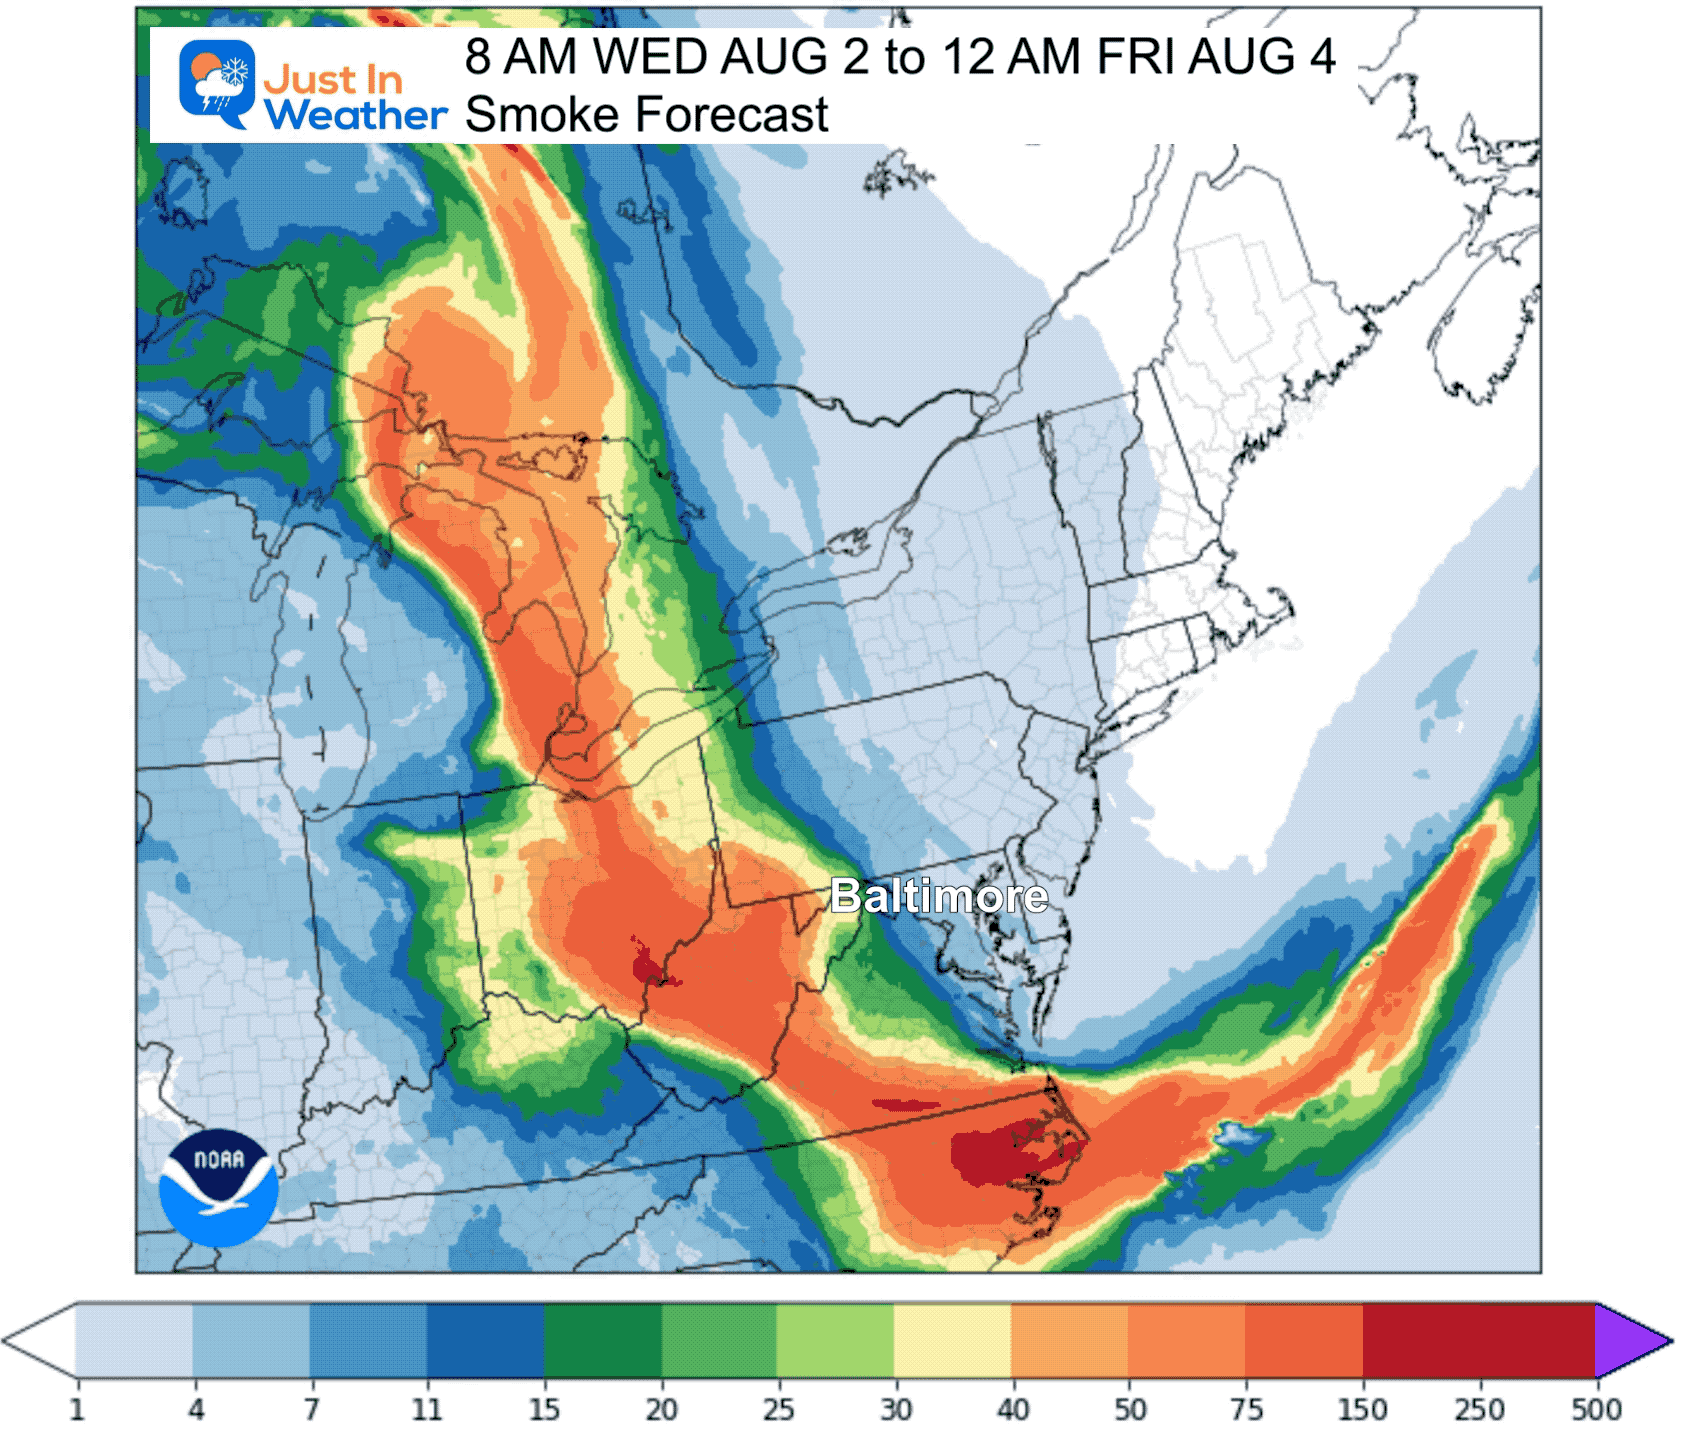 August 2 weather smoke forecast